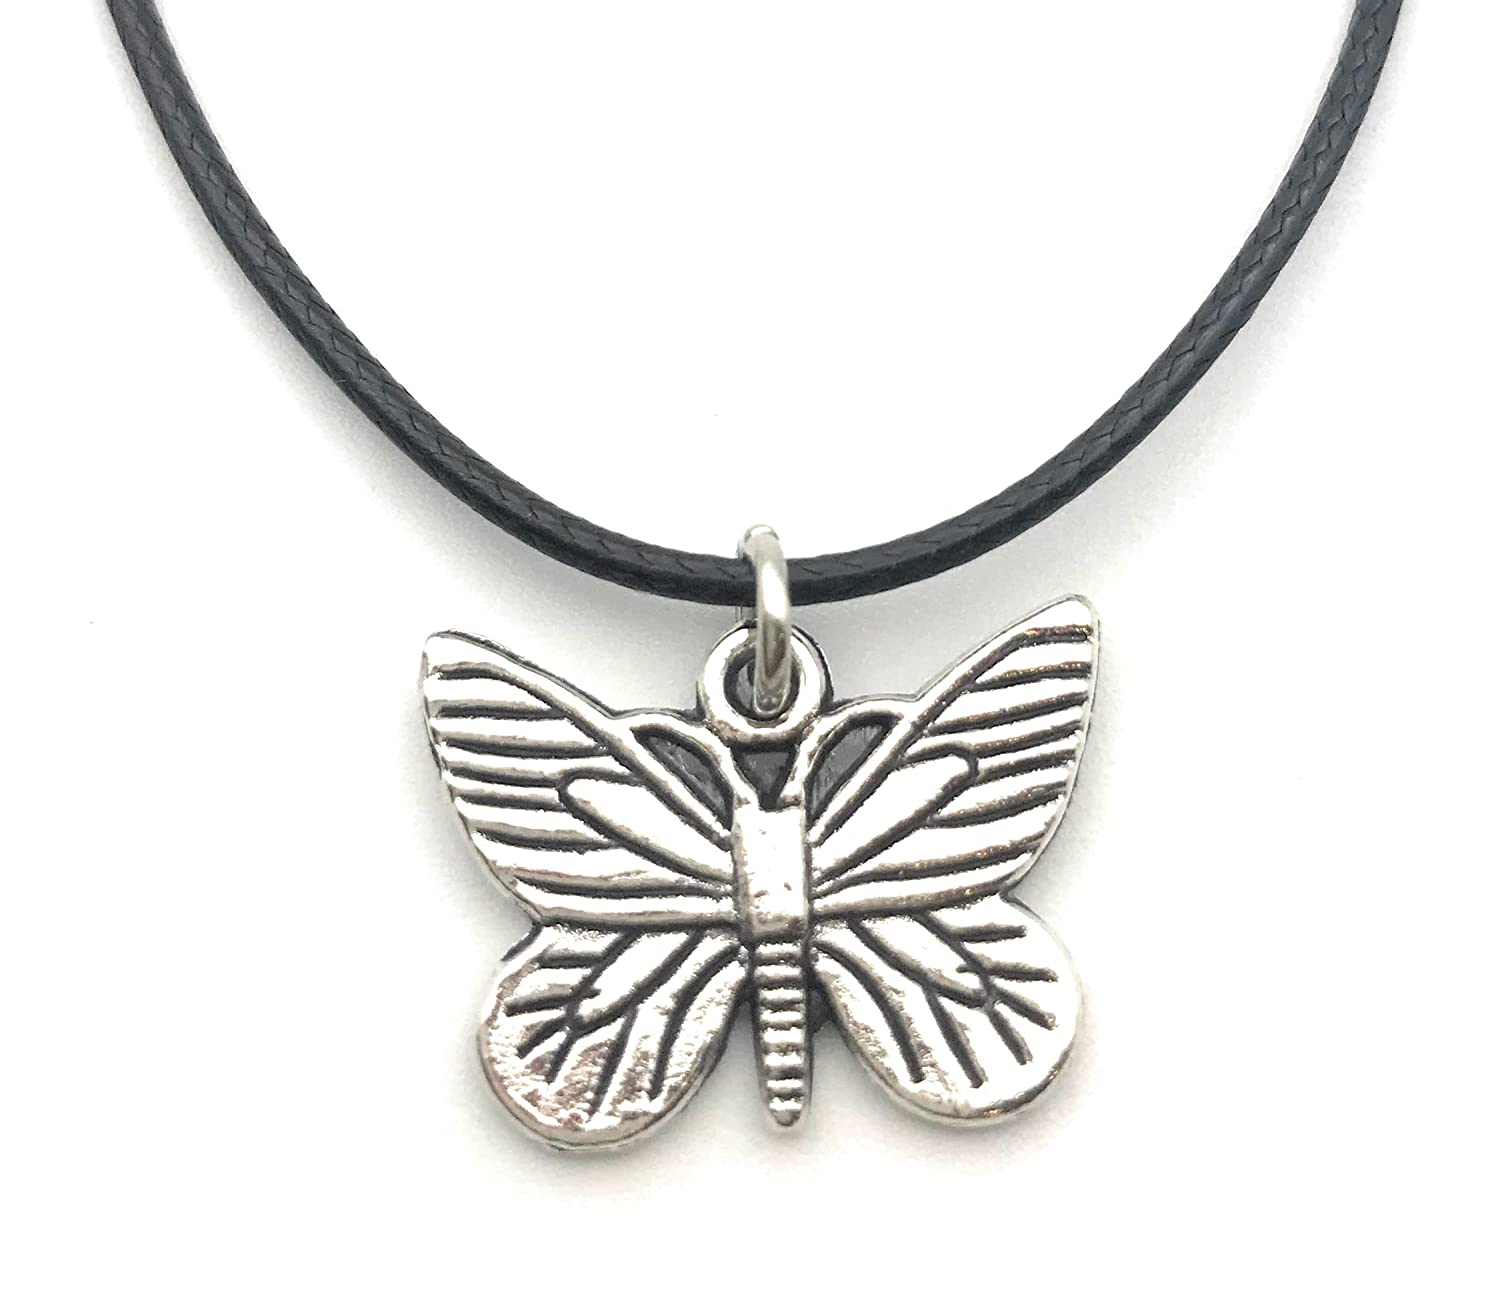 Butterfly Pendant Cotton Cord Necklace from Scott D Jewelry Designs